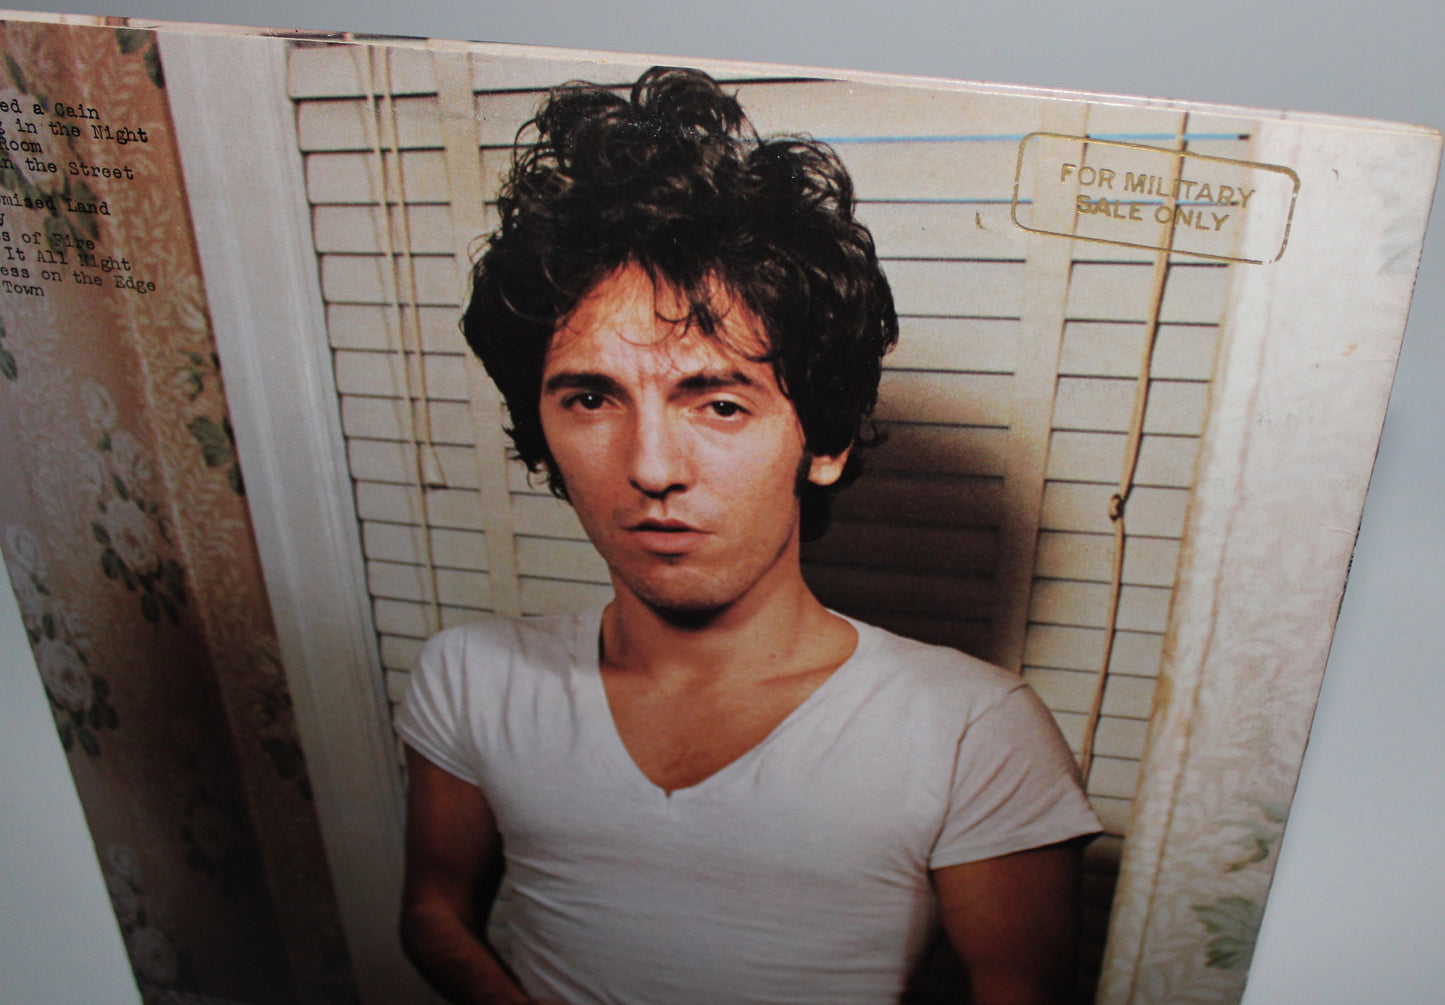 Bruce Springsteen - Darkness on the Edge of Town - "FOR MILITARY SALE ONLY" GOLD STAMP Vinyl Near Mint